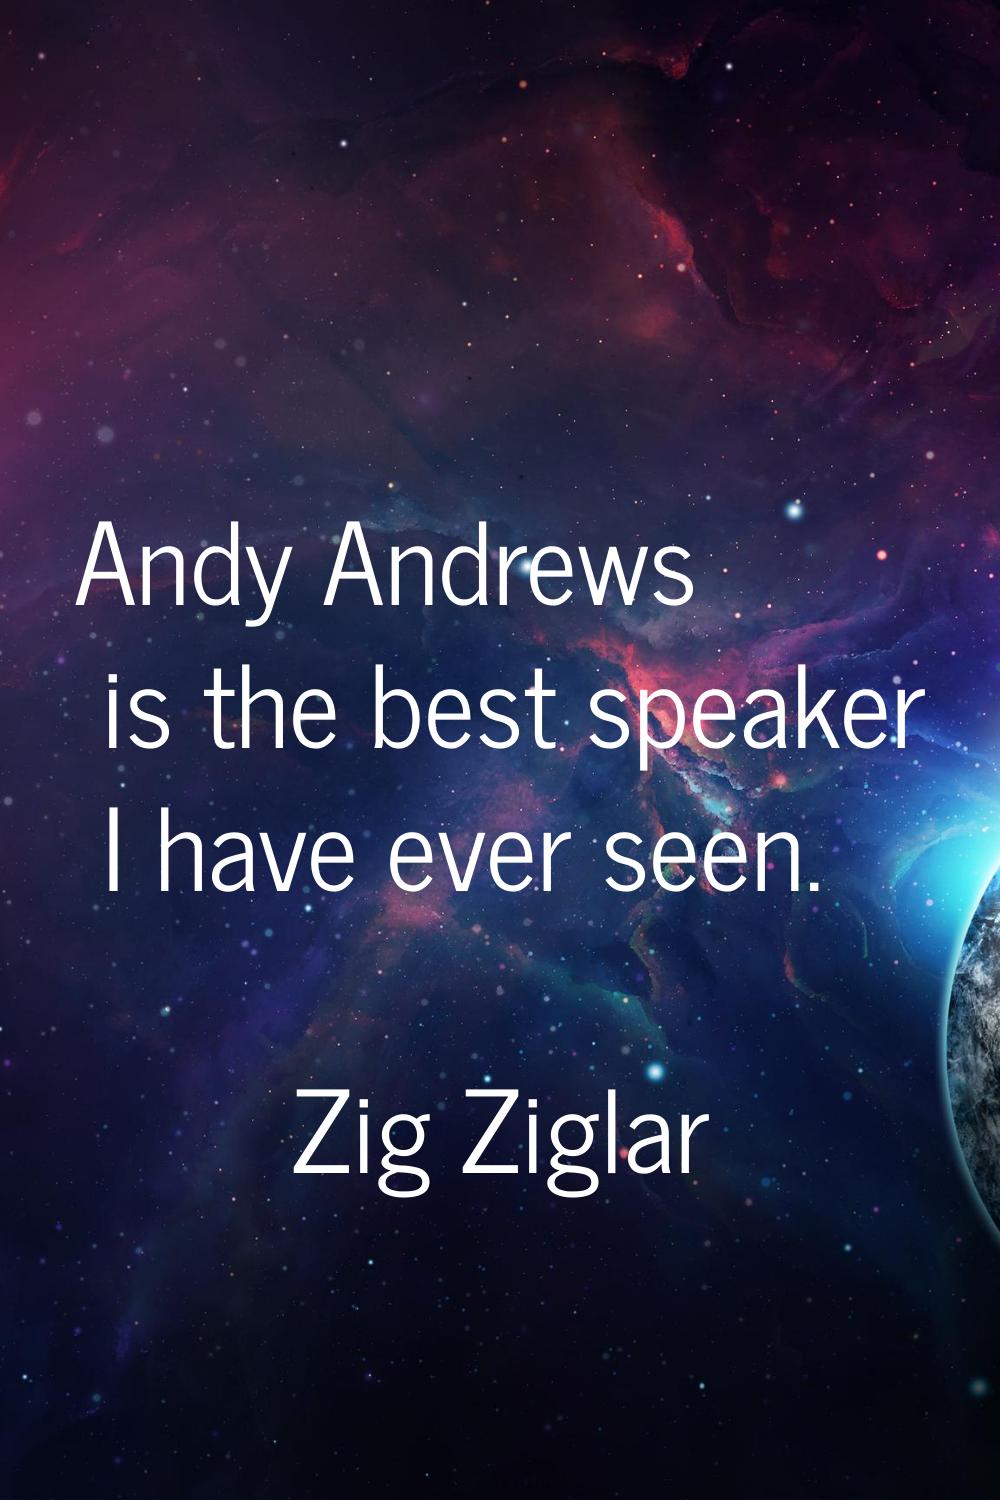 Andy Andrews is the best speaker I have ever seen.